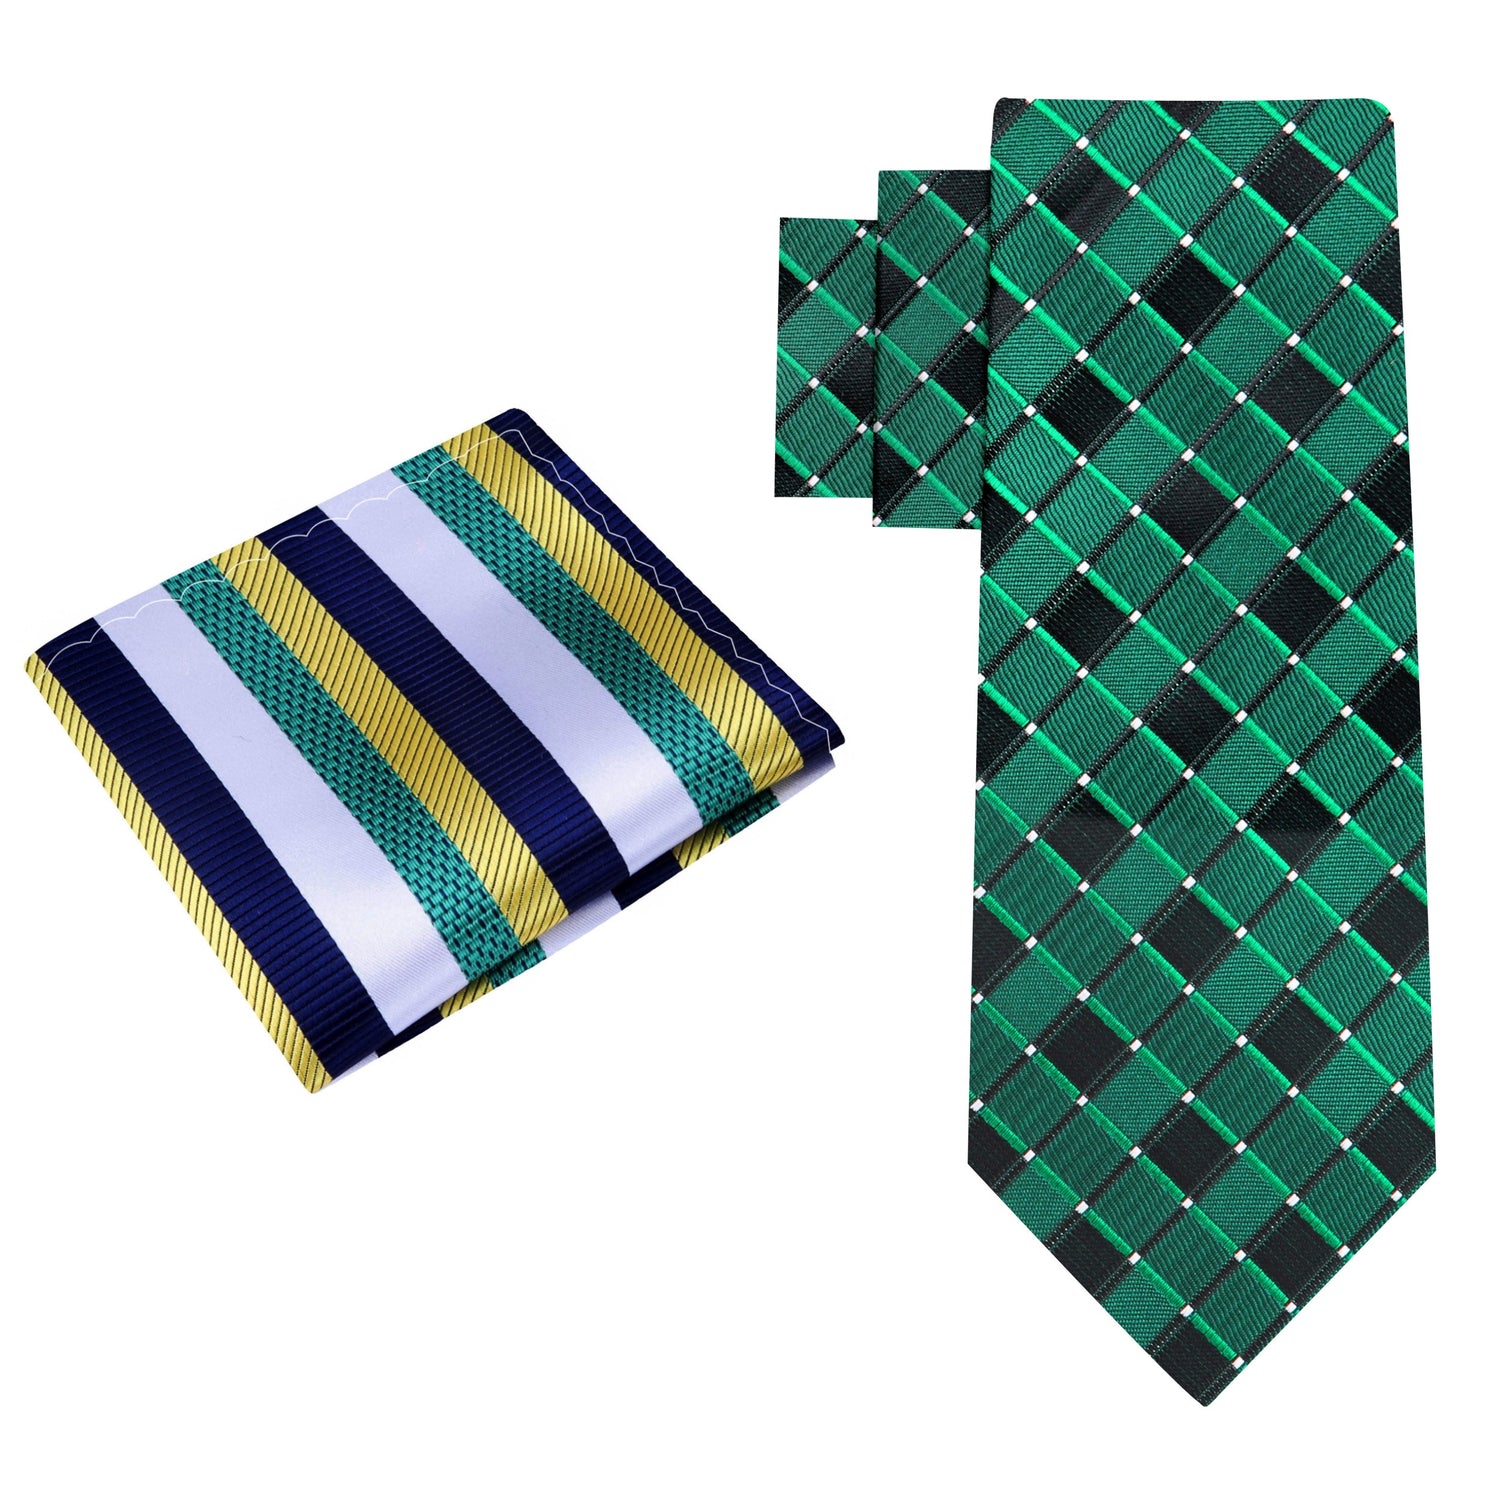 Alt View: Green Geometric Necktie and Accenting Blue, White, Yellow and Green Stripe Square